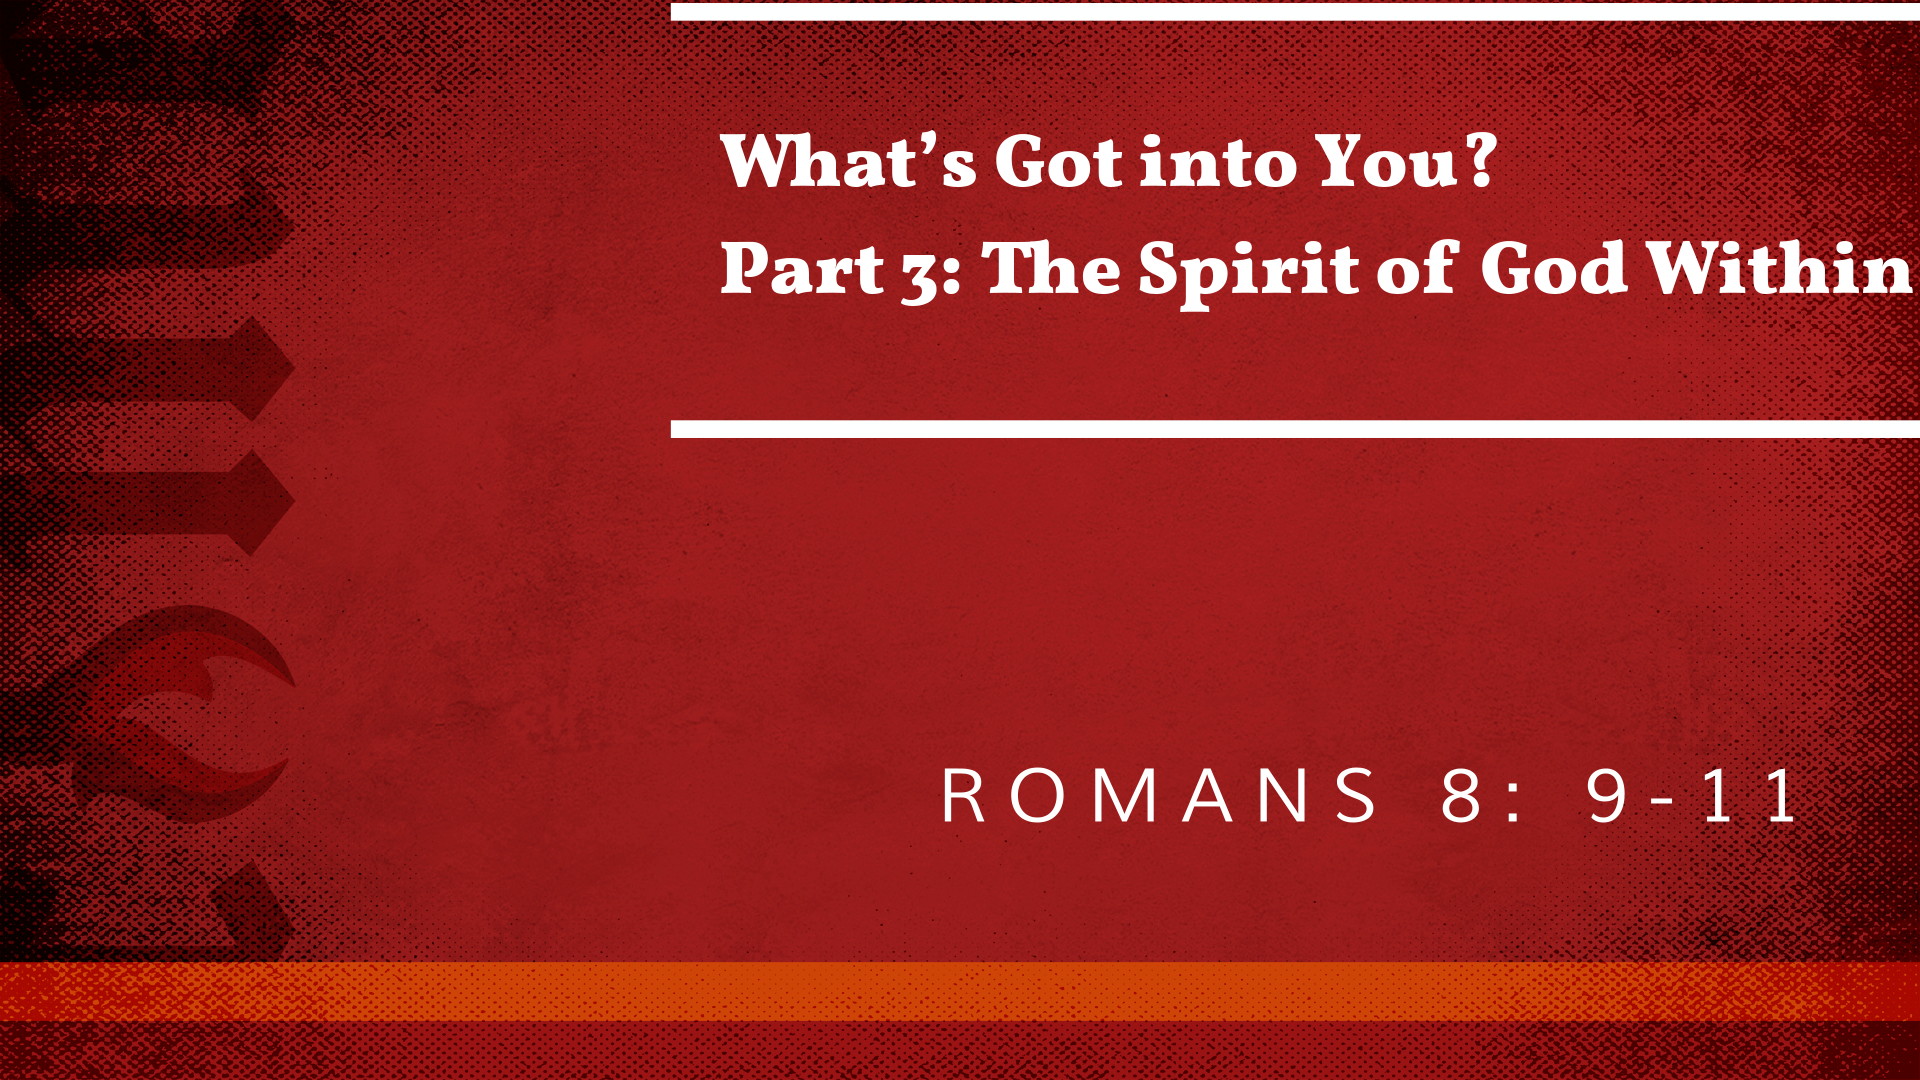 Mar 06, 2022 - What's Got into You? Part 3: The Spirit of God Within (Video) - Romans 8: 9-11